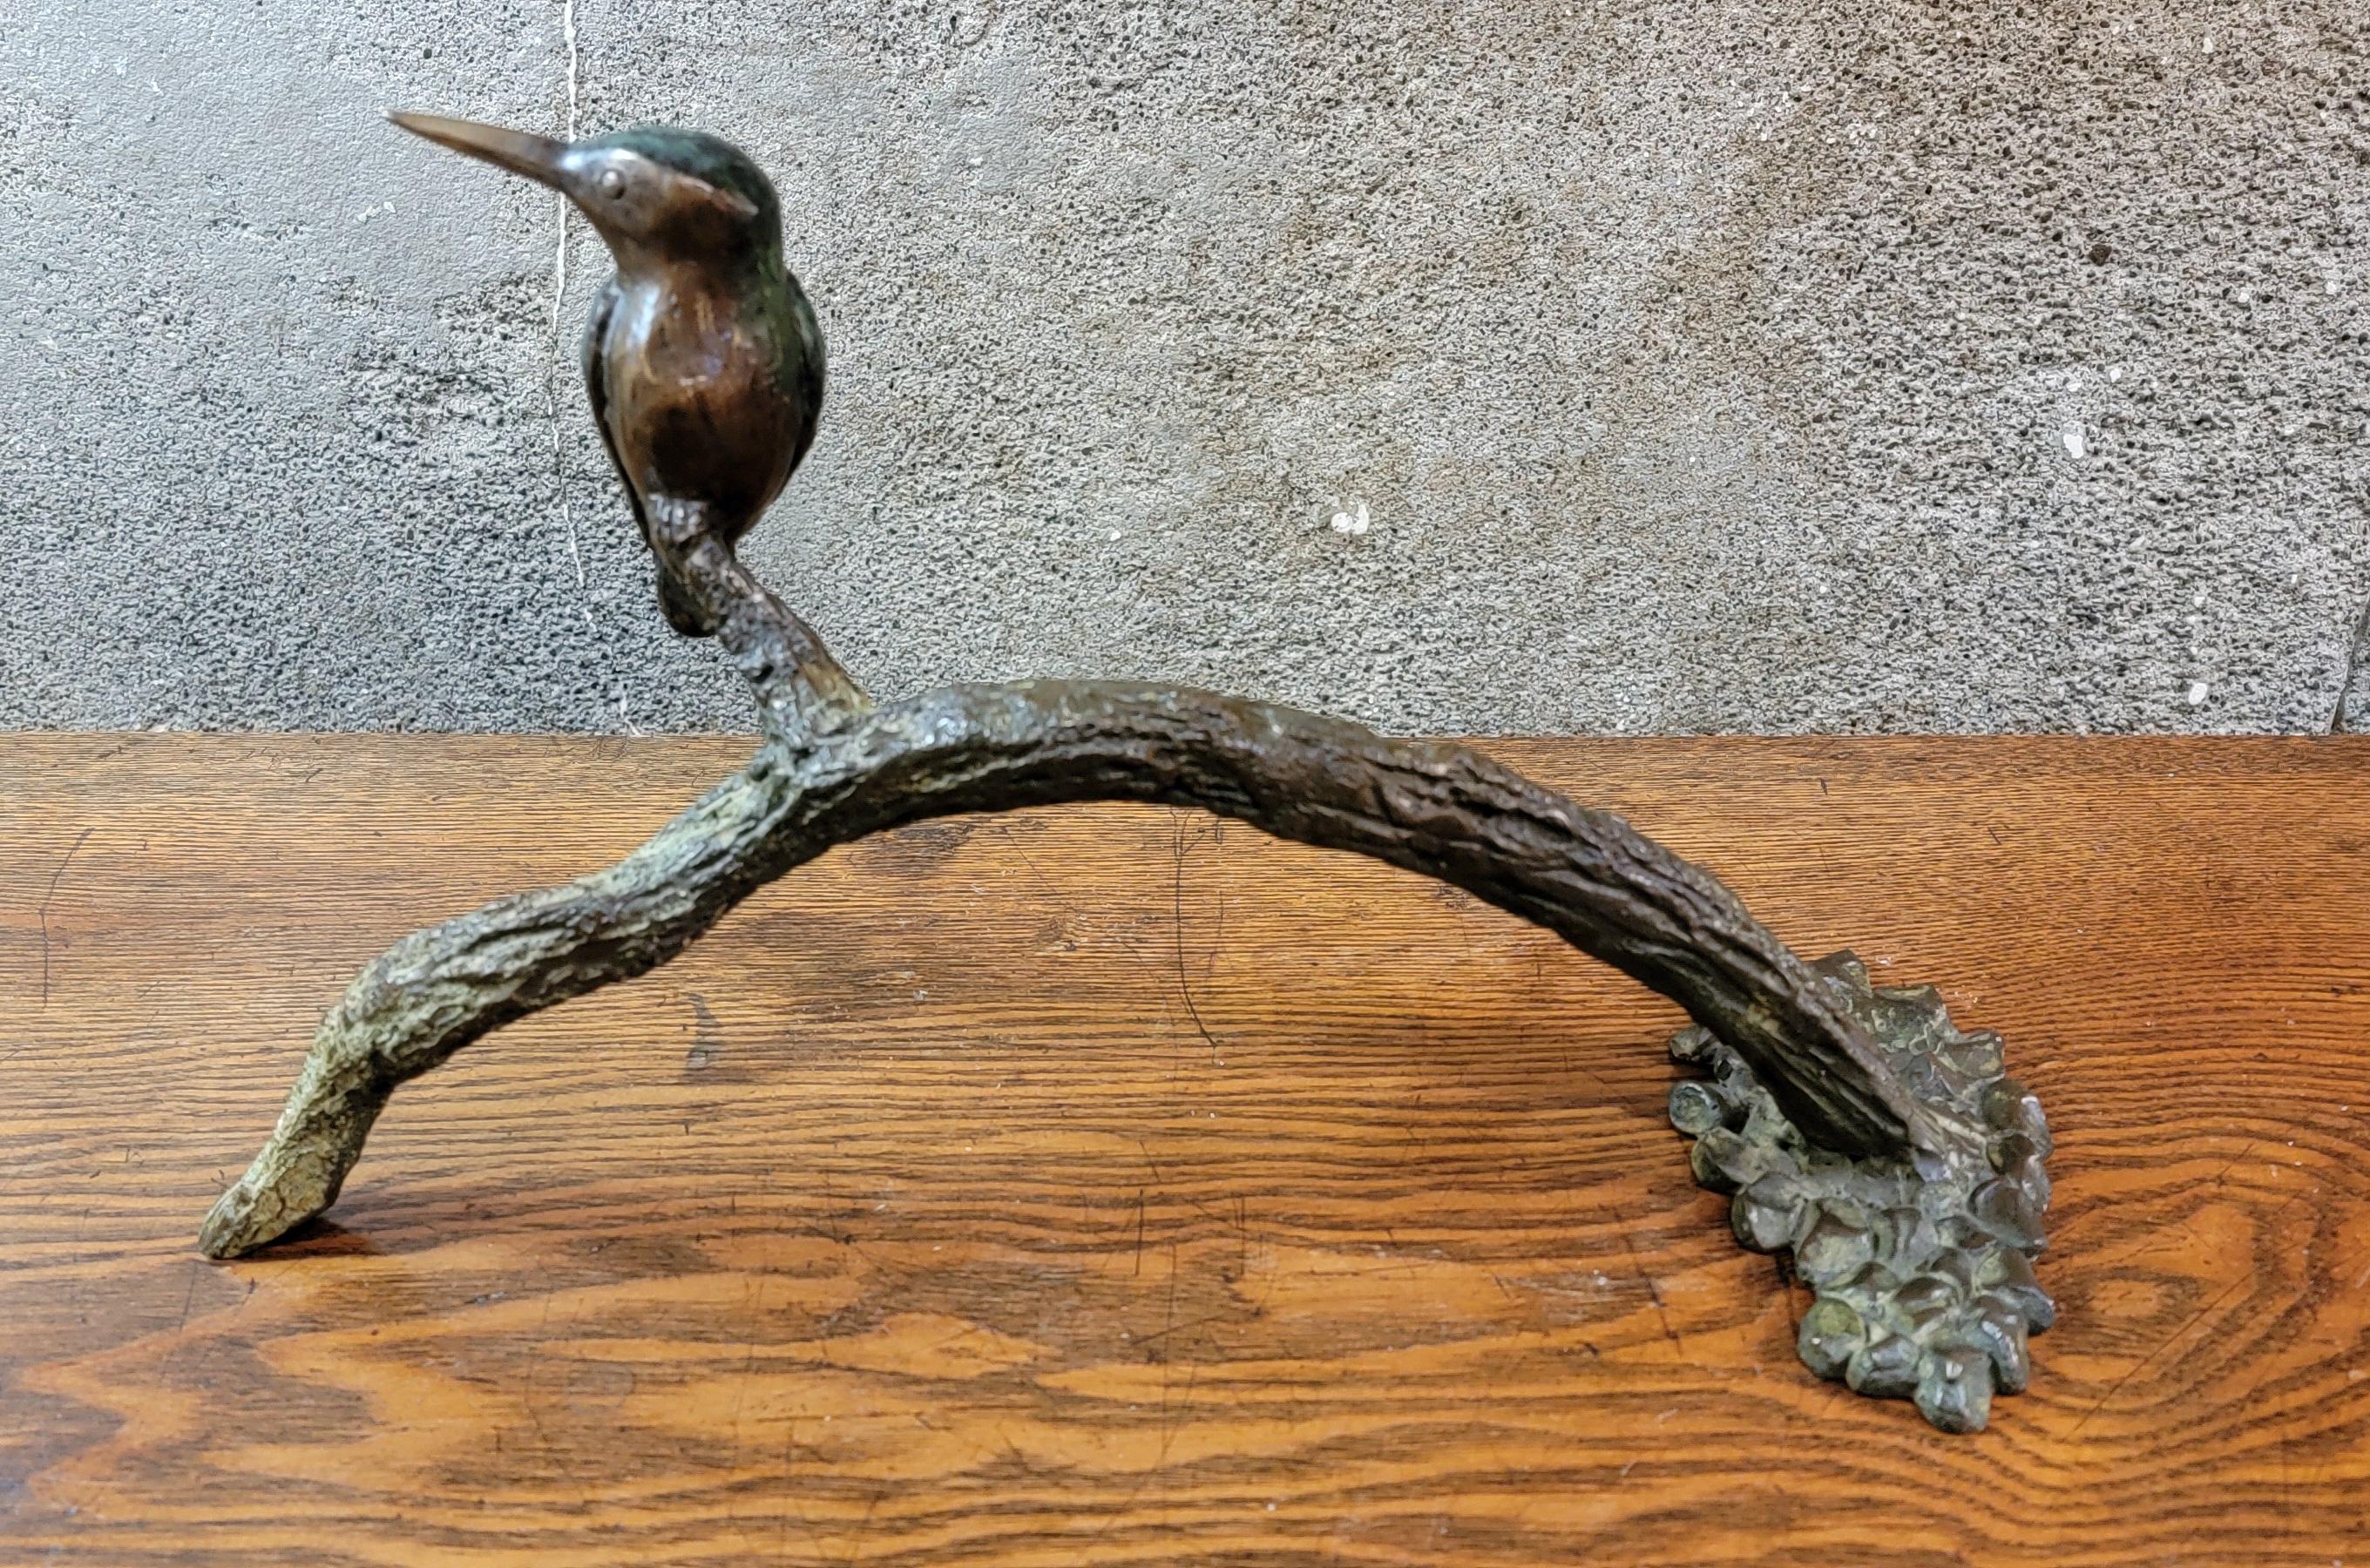 A cast bronze sculpture of a bird perched on a branch. Signed Denis Mathews and dated 1996. Appears to be numbered limited casting but numbers are indecipherable. Measures 14 inches wide. Denis Mathews (British b. 1913).